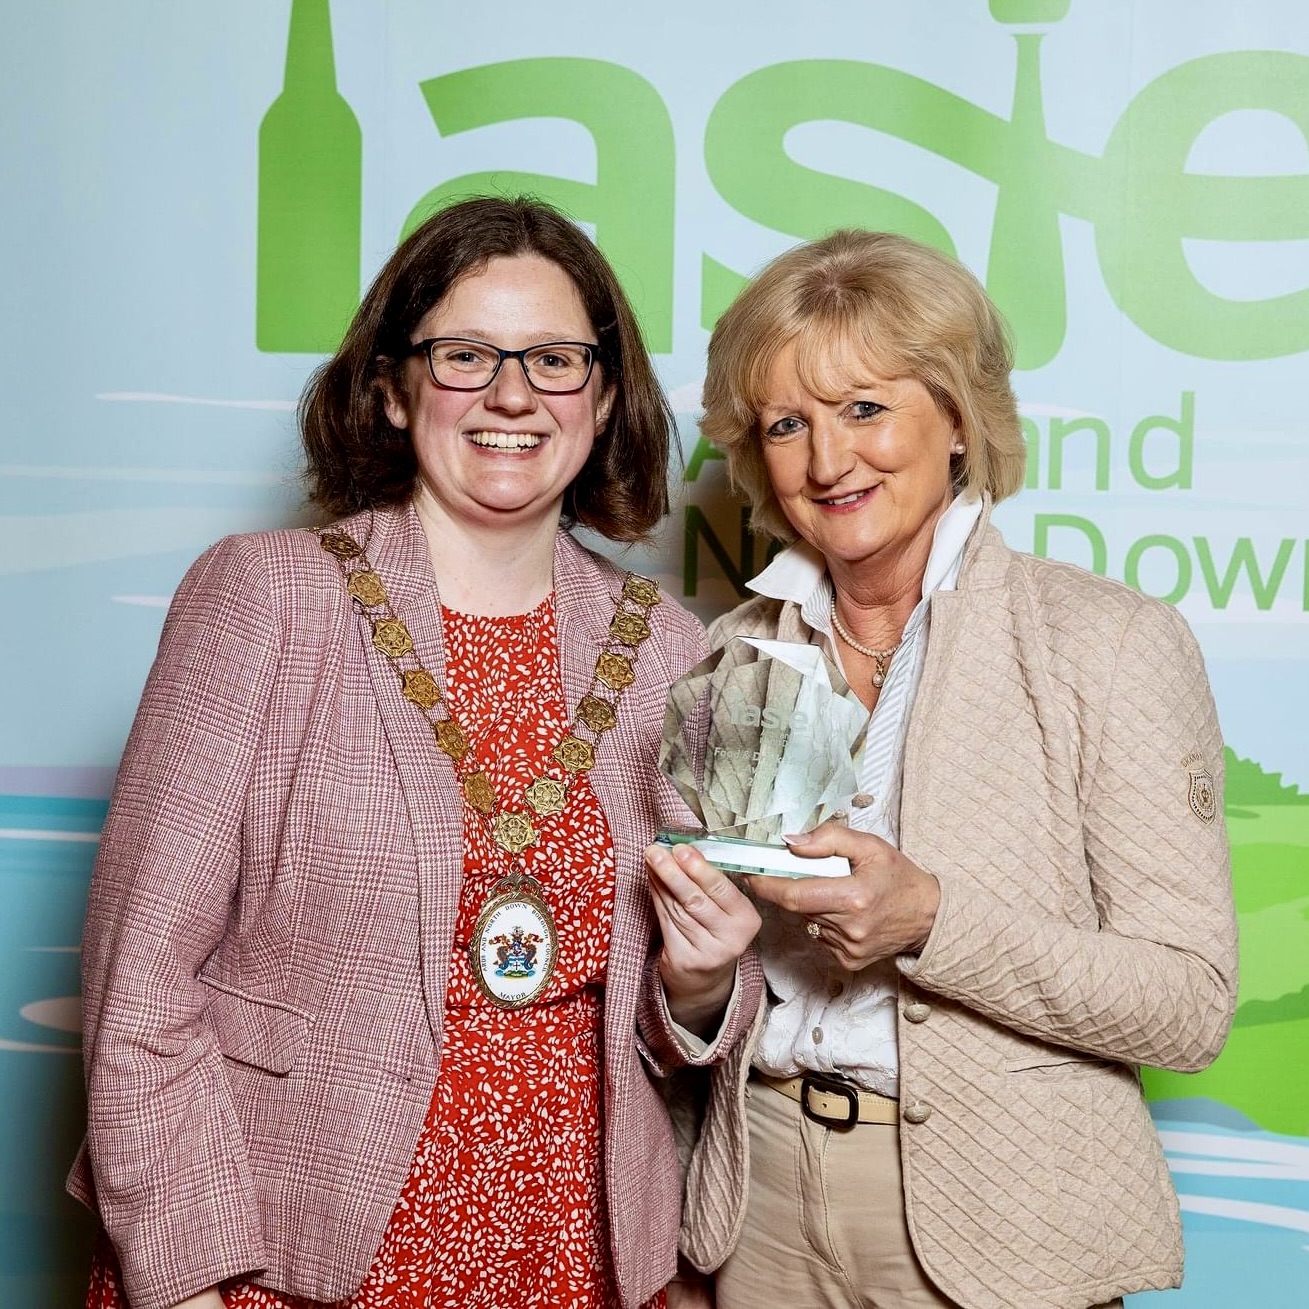 Mash Direct recognised at the Taste Ards & North Down Food & Drink Hero Awards